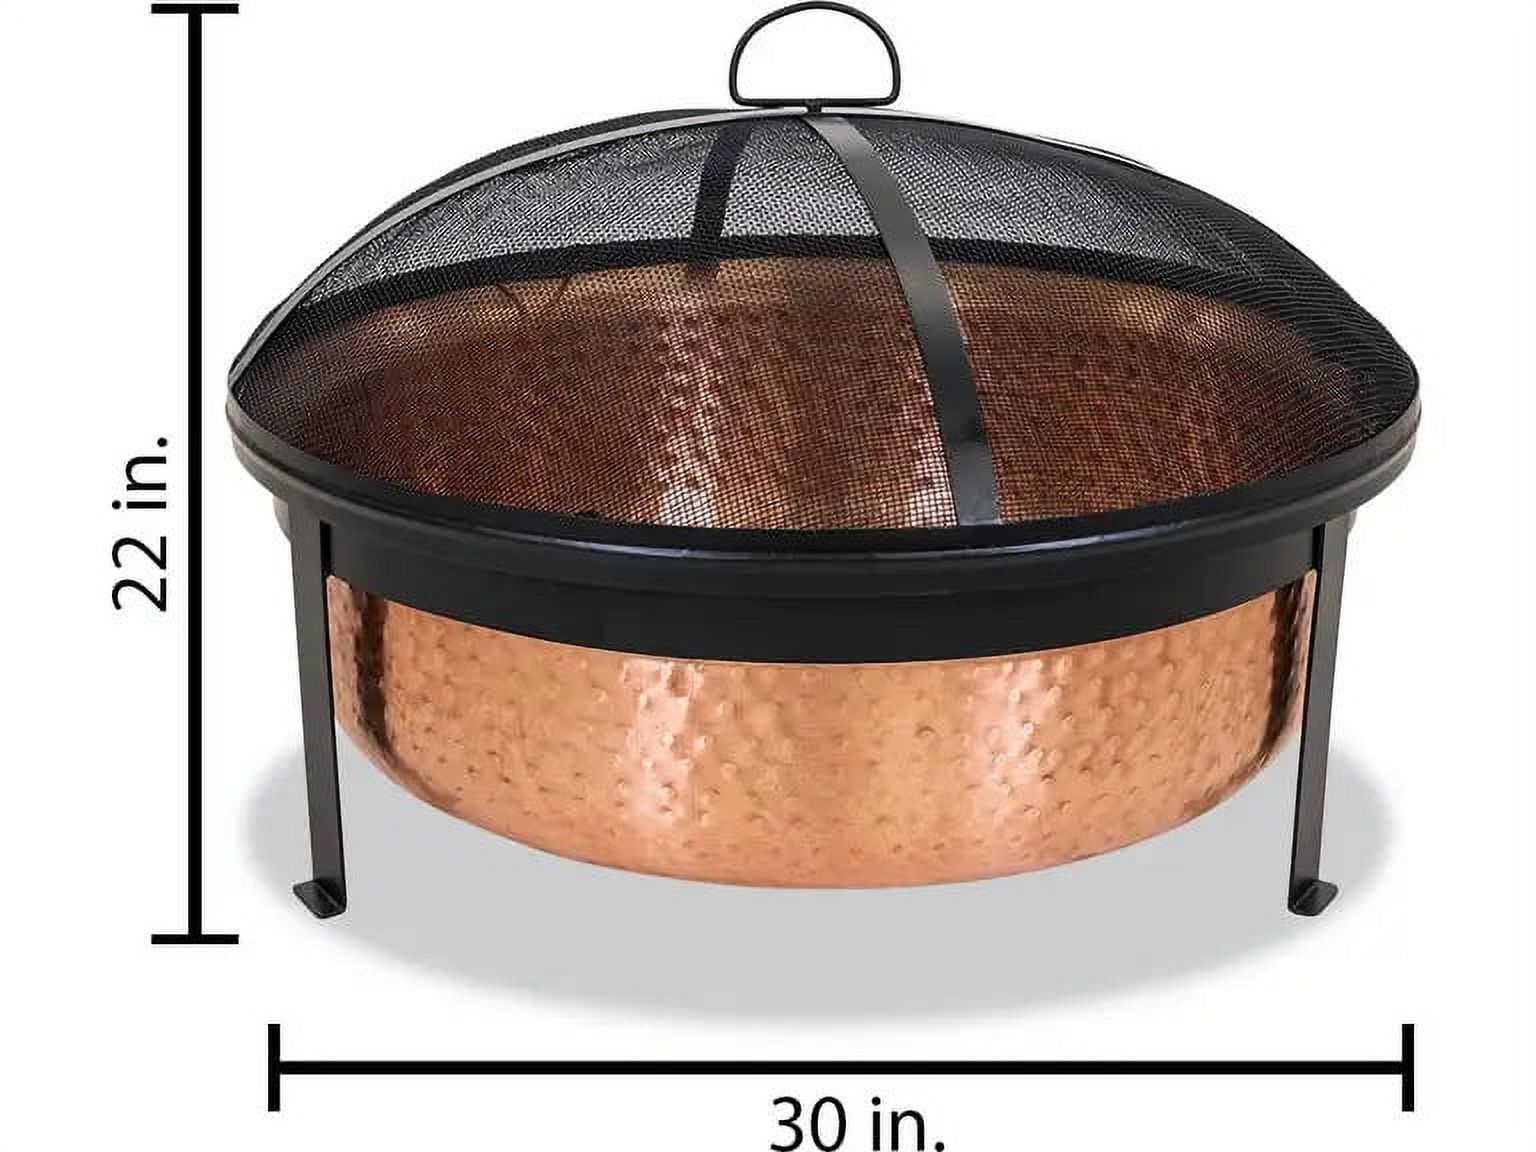 Better Homes & Gardens Wood Burning Copper Fire Pit, 30-inch diameter and 22-inch Height - image 8 of 9